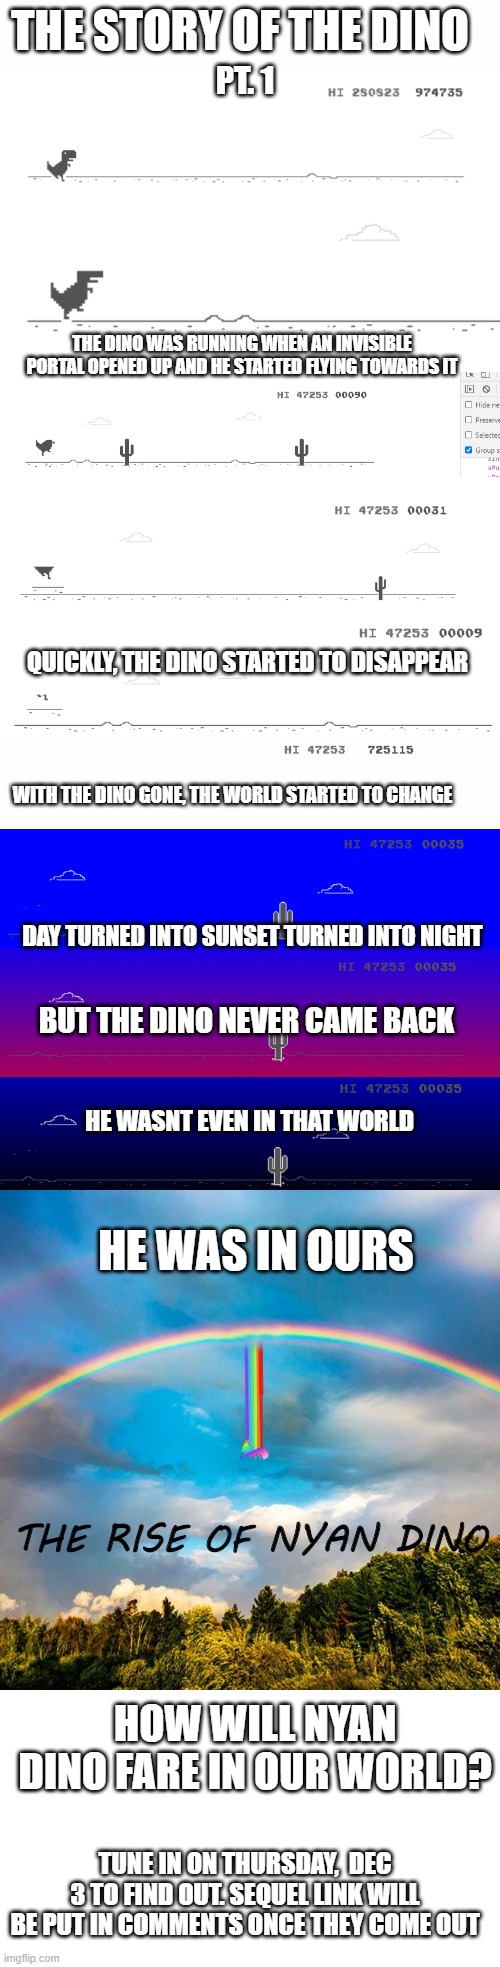 The story of the dino pt. 1 | THE STORY OF THE DINO; PT. 1; THE DINO WAS RUNNING WHEN AN INVISIBLE PORTAL OPENED UP AND HE STARTED FLYING TOWARDS IT; QUICKLY, THE DINO STARTED TO DISAPPEAR; WITH THE DINO GONE, THE WORLD STARTED TO CHANGE; DAY TURNED INTO SUNSET TURNED INTO NIGHT; BUT THE DINO NEVER CAME BACK; HE WASNT EVEN IN THAT WORLD; HE WAS IN OURS; THE RISE OF NYAN DINO; HOW WILL NYAN DINO FARE IN OUR WORLD? TUNE IN ON THURSDAY,  DEC 3 TO FIND OUT. SEQUEL LINK WILL BE PUT IN COMMENTS ONCE THEY COME OUT | image tagged in dino | made w/ Imgflip meme maker